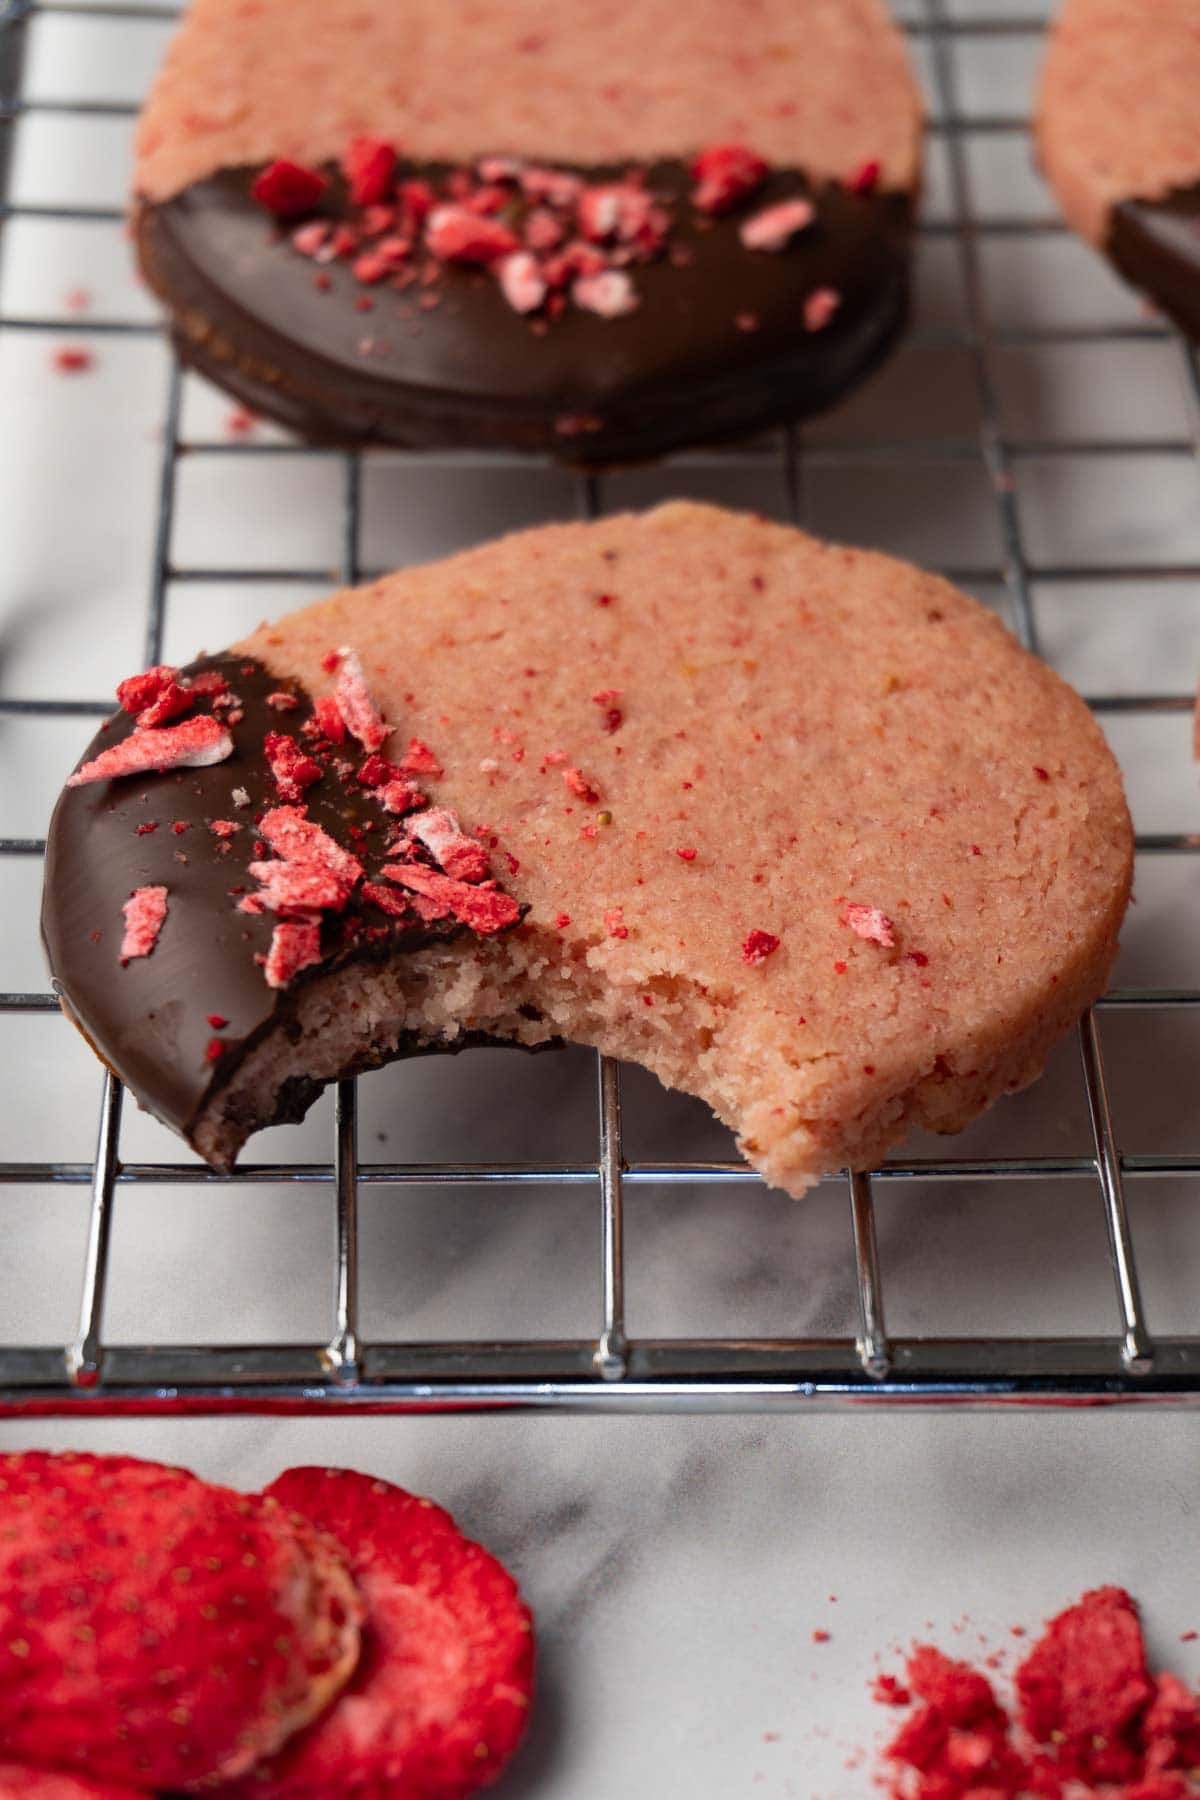 Halfway covered with dark chocolate strawberry shortbread cookies decorated with crushed freeze-dried strawberries are lying on a wire rack; one bite was taken from one of the cookies.